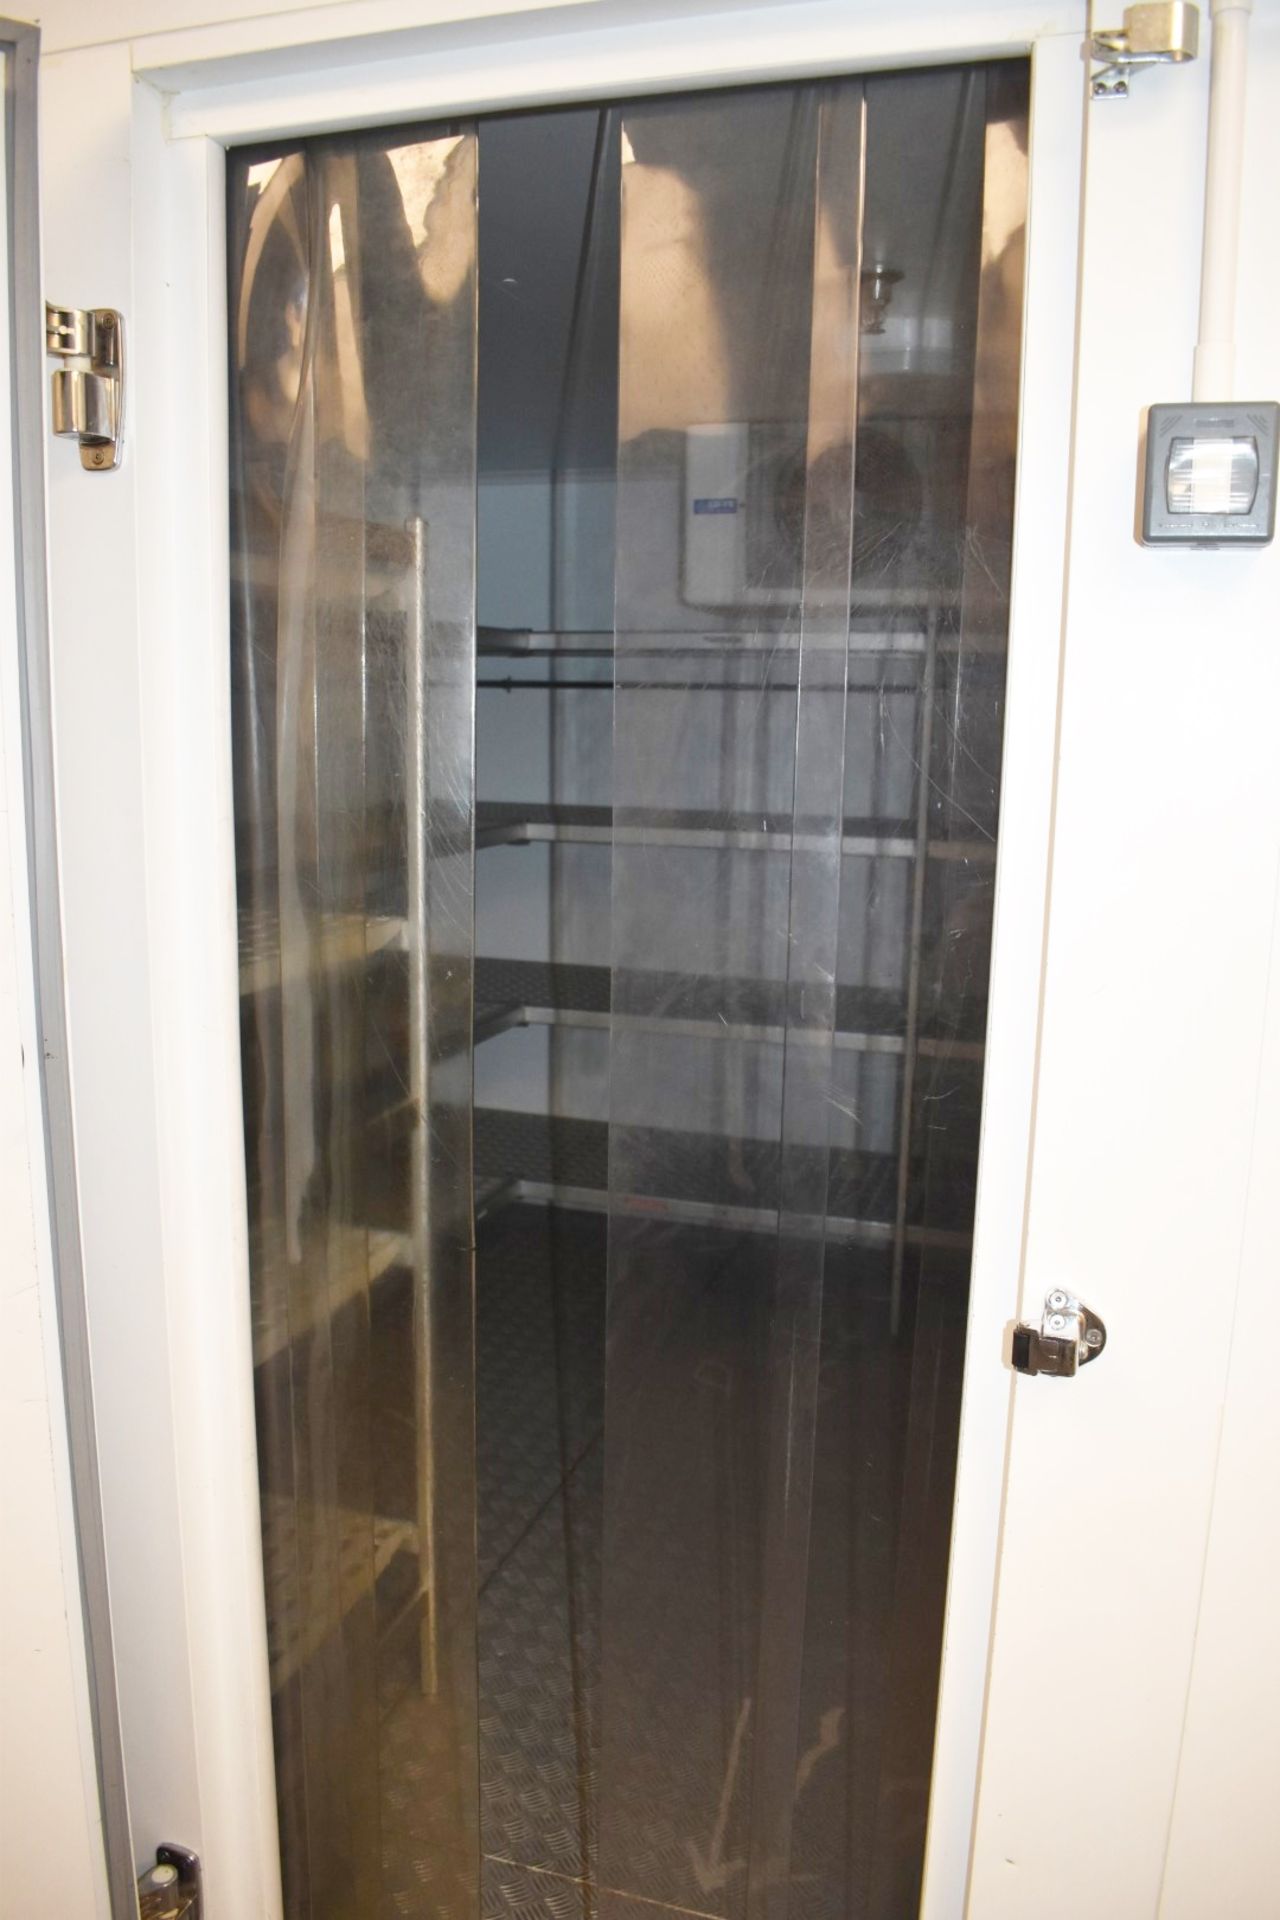 Large Collection of Ez Rack Aluminium Cold Room Shelving With Polymer Shelving - Contents of Cold - Image 10 of 10